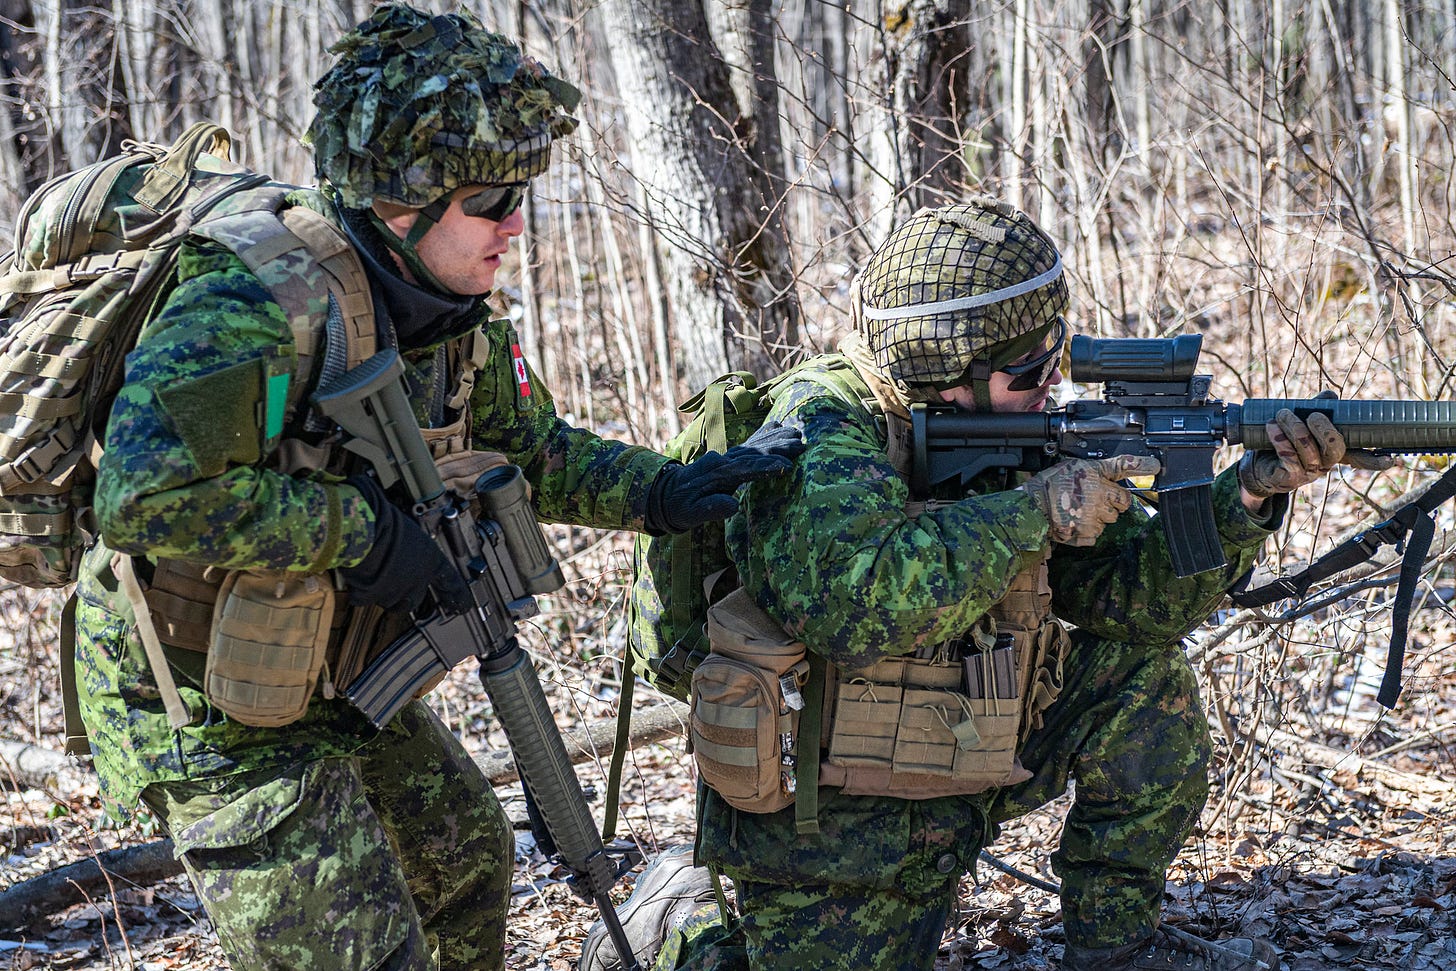 One soldier kneels on the ground aiming his weapon, while another stands behind him in a sunny, wooded area.